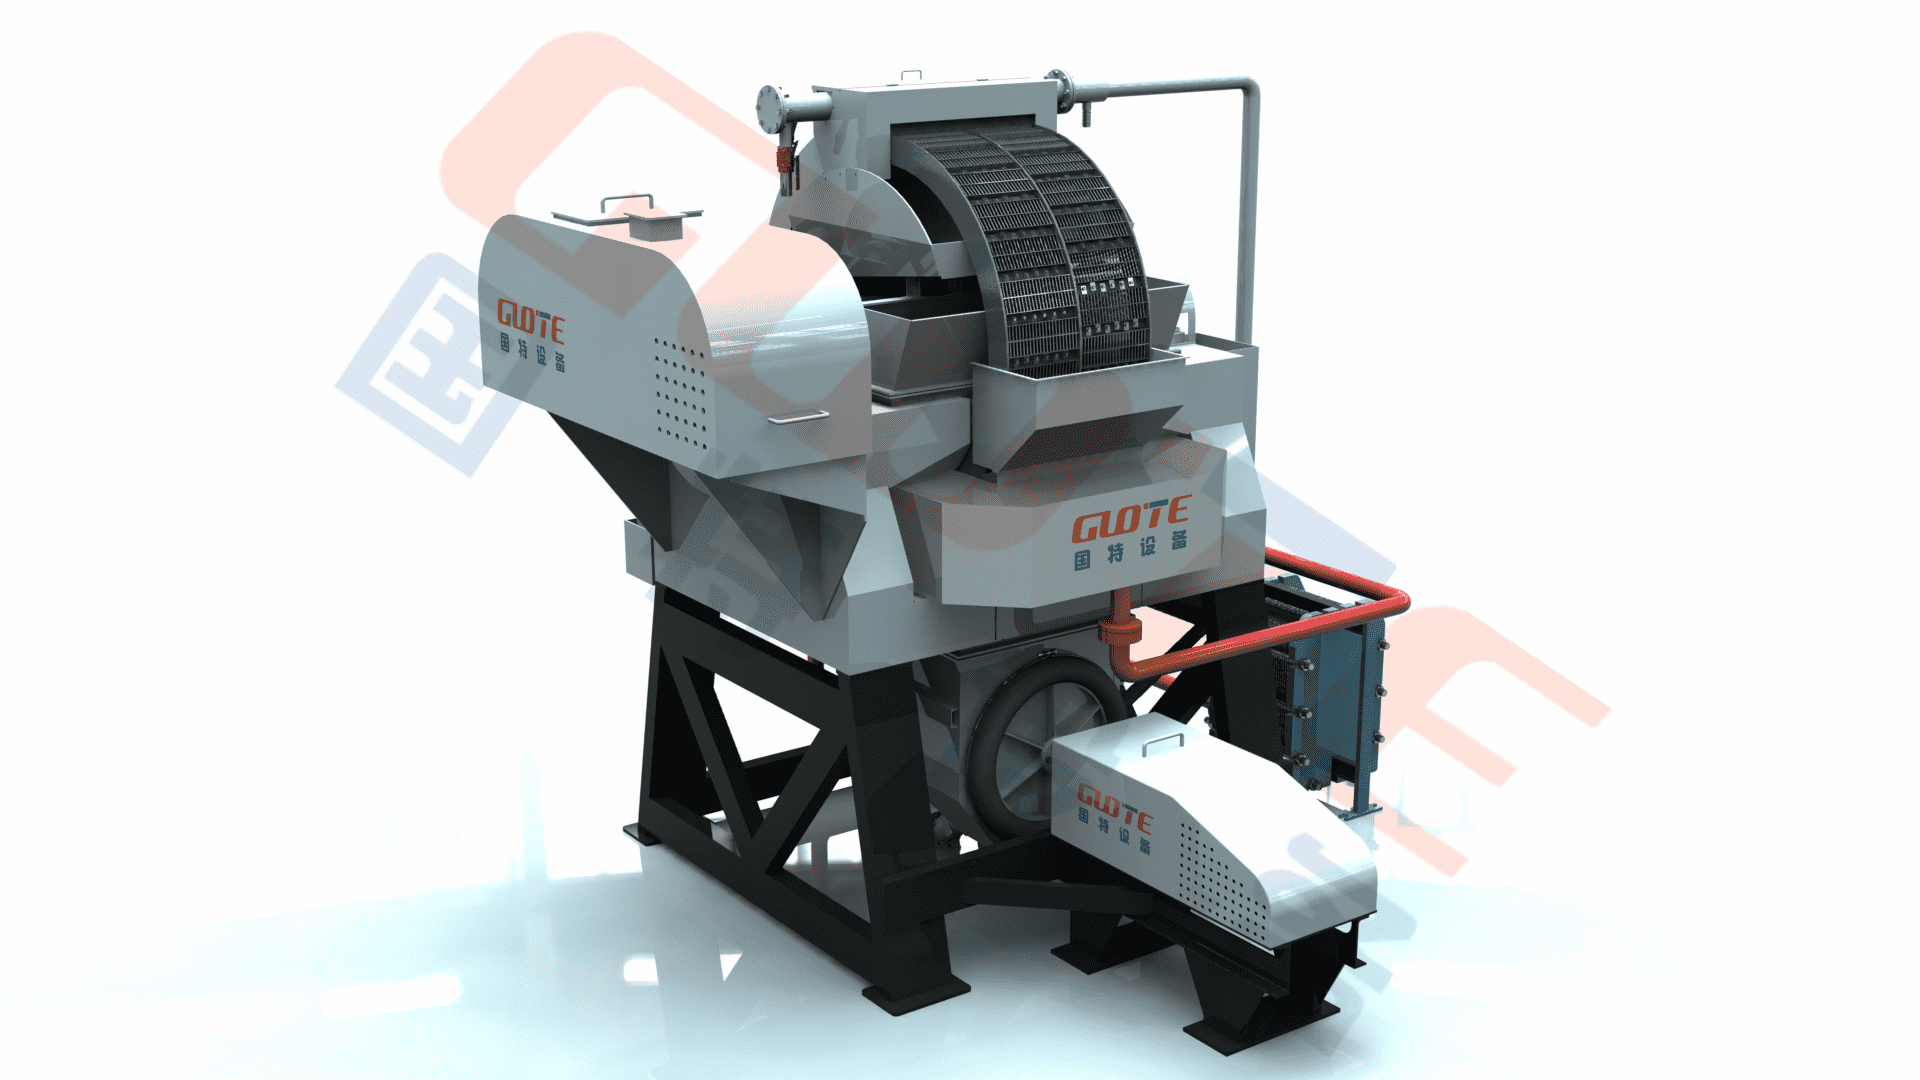 Factory source Magnetic Separator For Iron Sand - Reasonable price China Good Quality Wet Magnetic Separator From Jxsc Mining Machinery Factory – Guote Featured Image